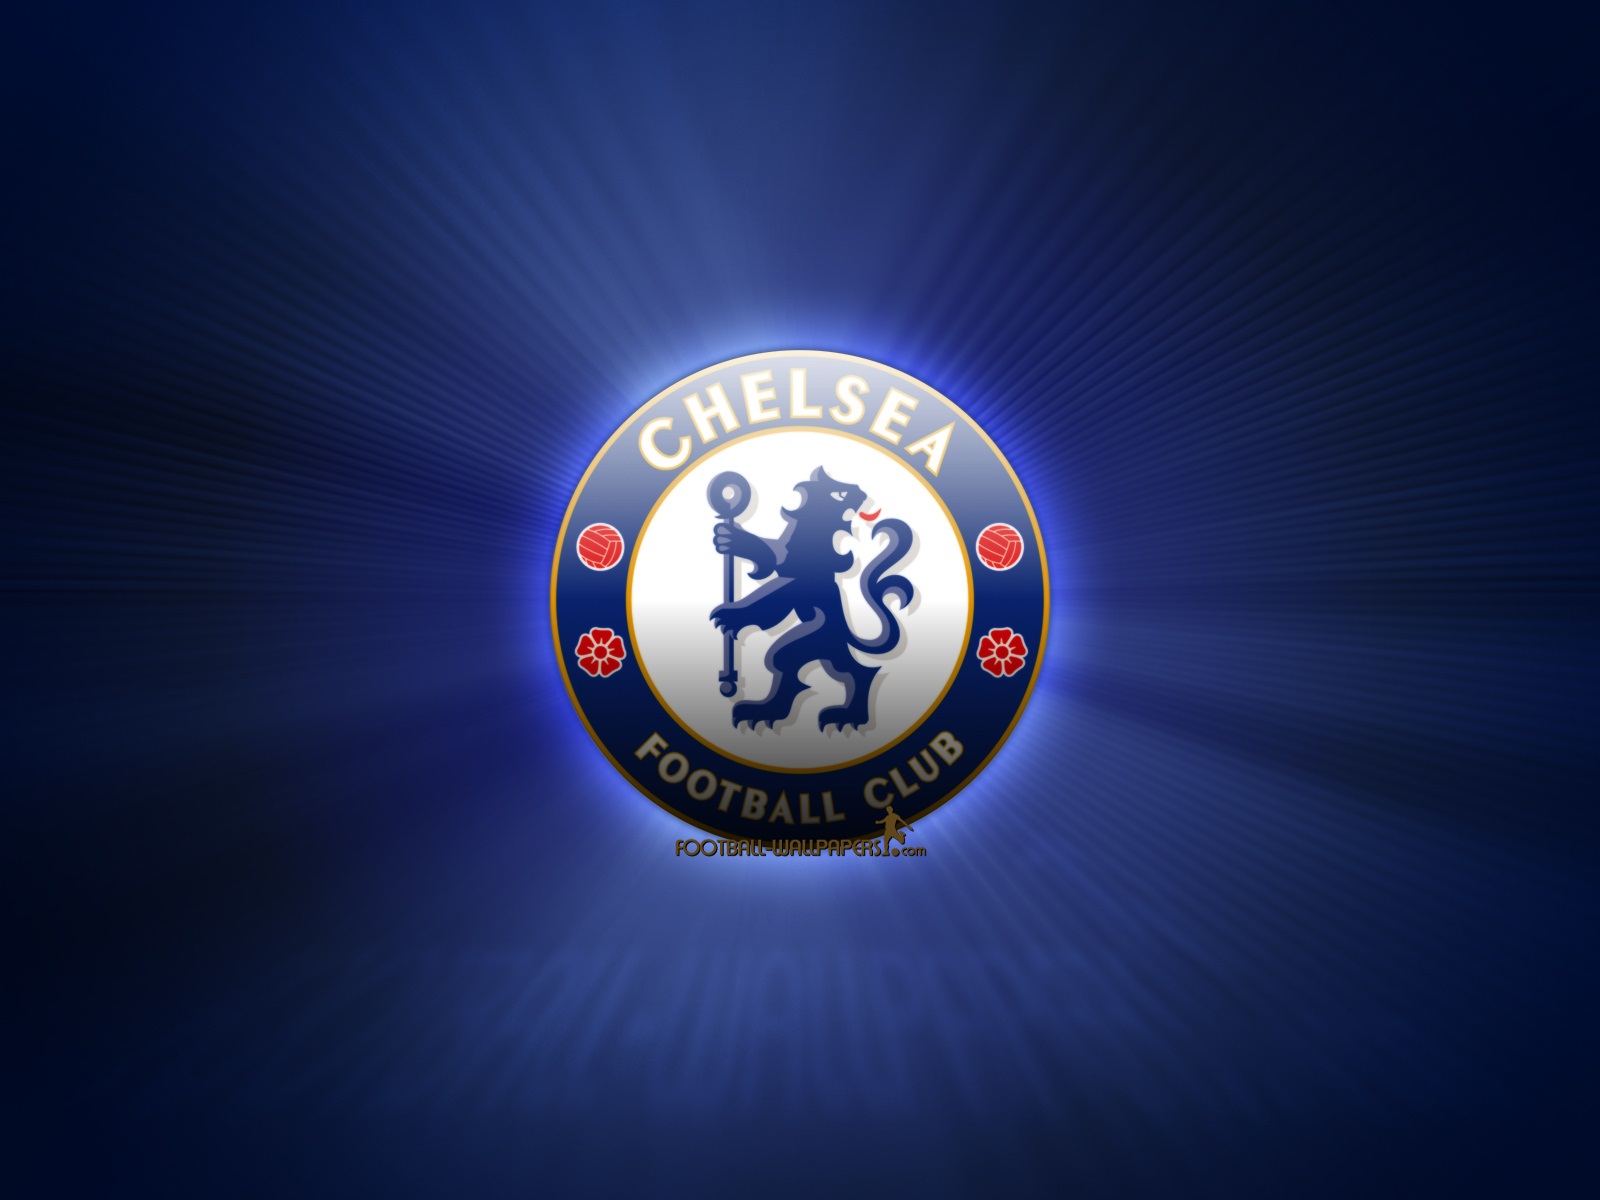 chelsea wallpapers on Chelsea Fc 1600x1200 Wallpapers Download   Desktop Wallpapers  Hd And